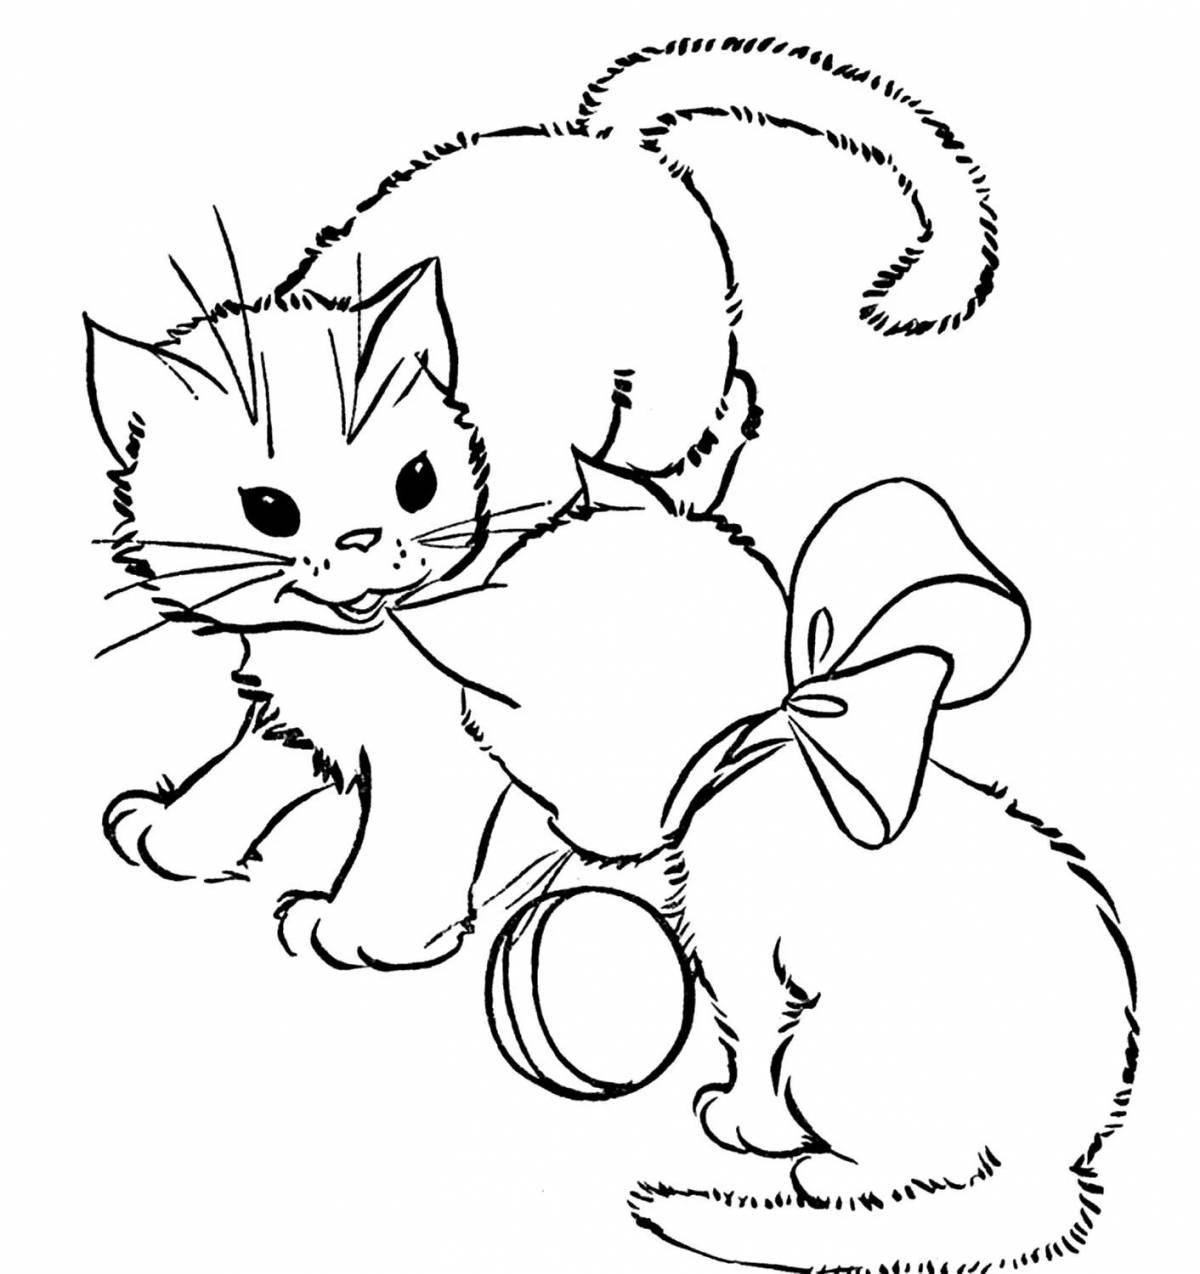 Adorable kittens coloring pages for 6-7 year olds